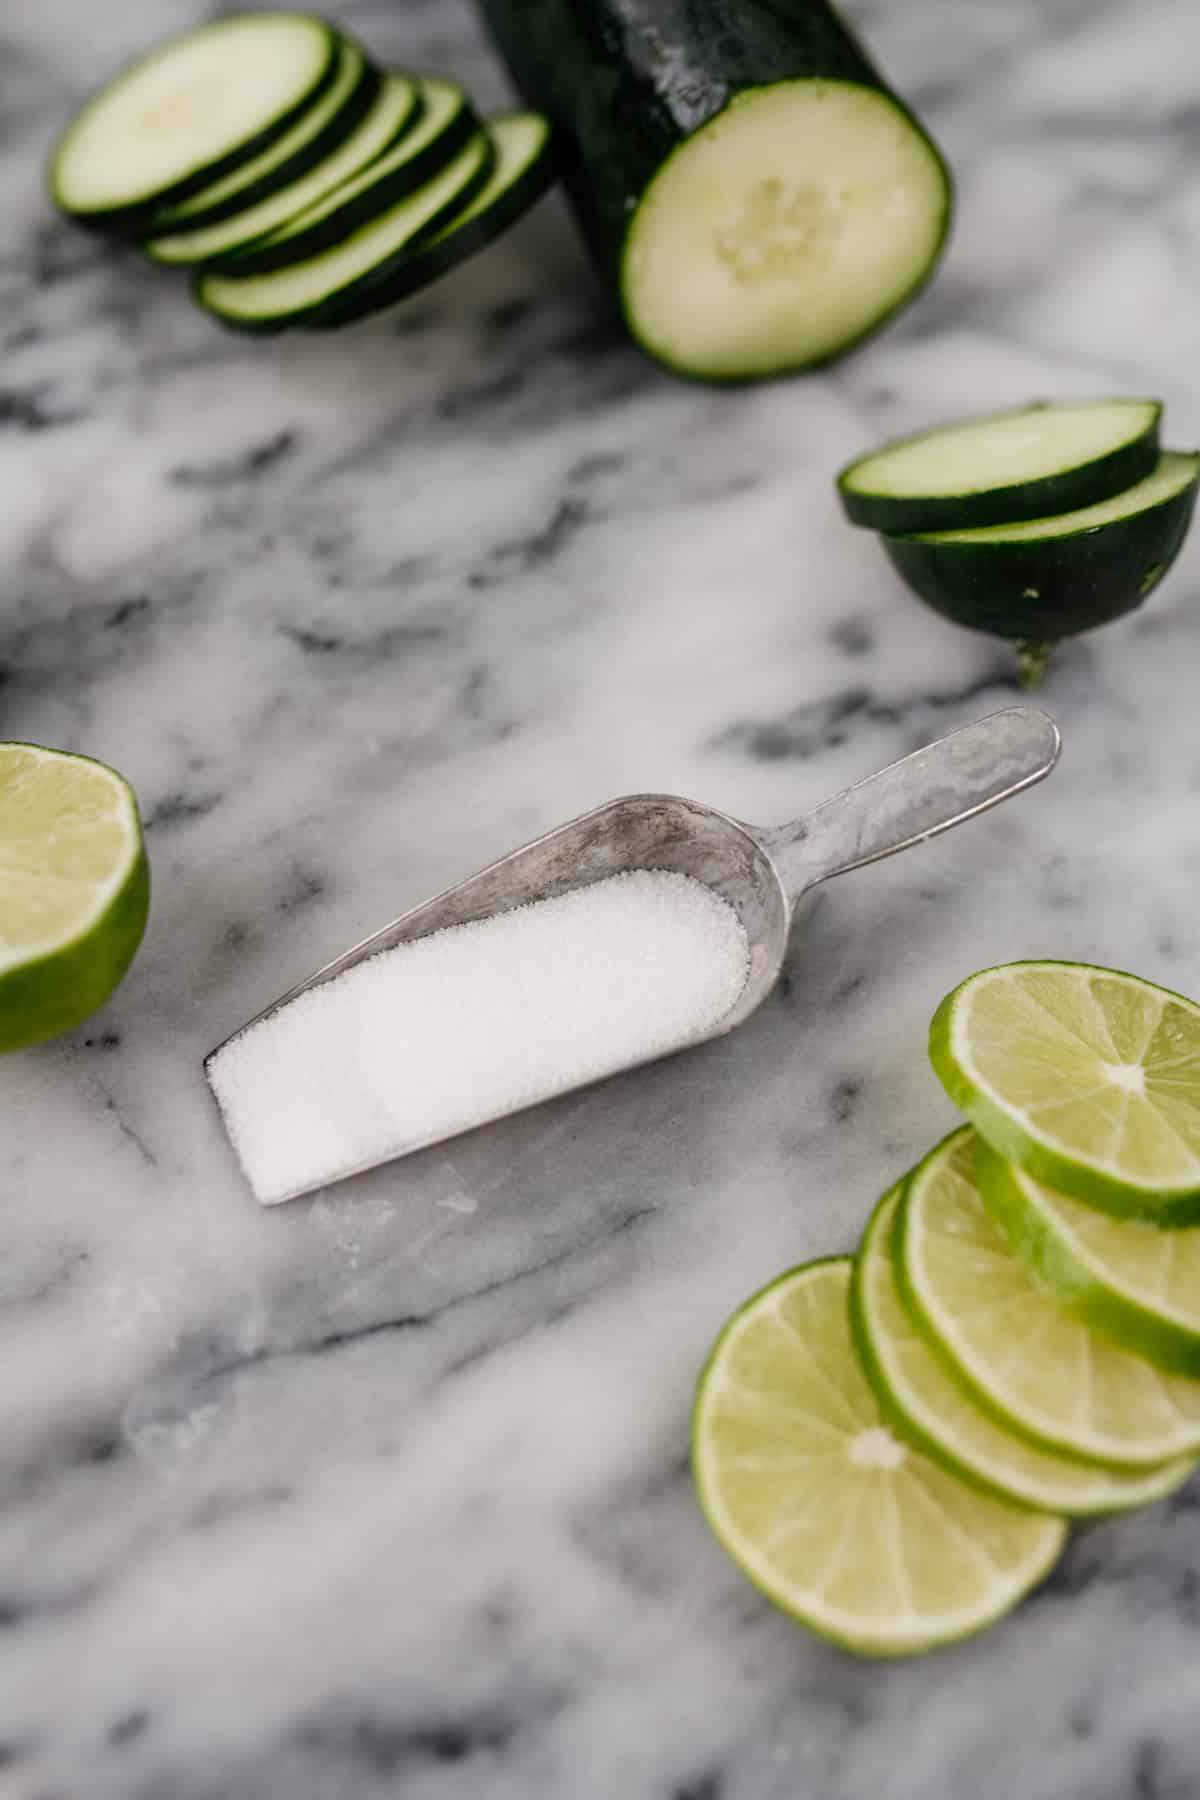 Slices of cucumber, limes, and a scoop of sugar on marble board.